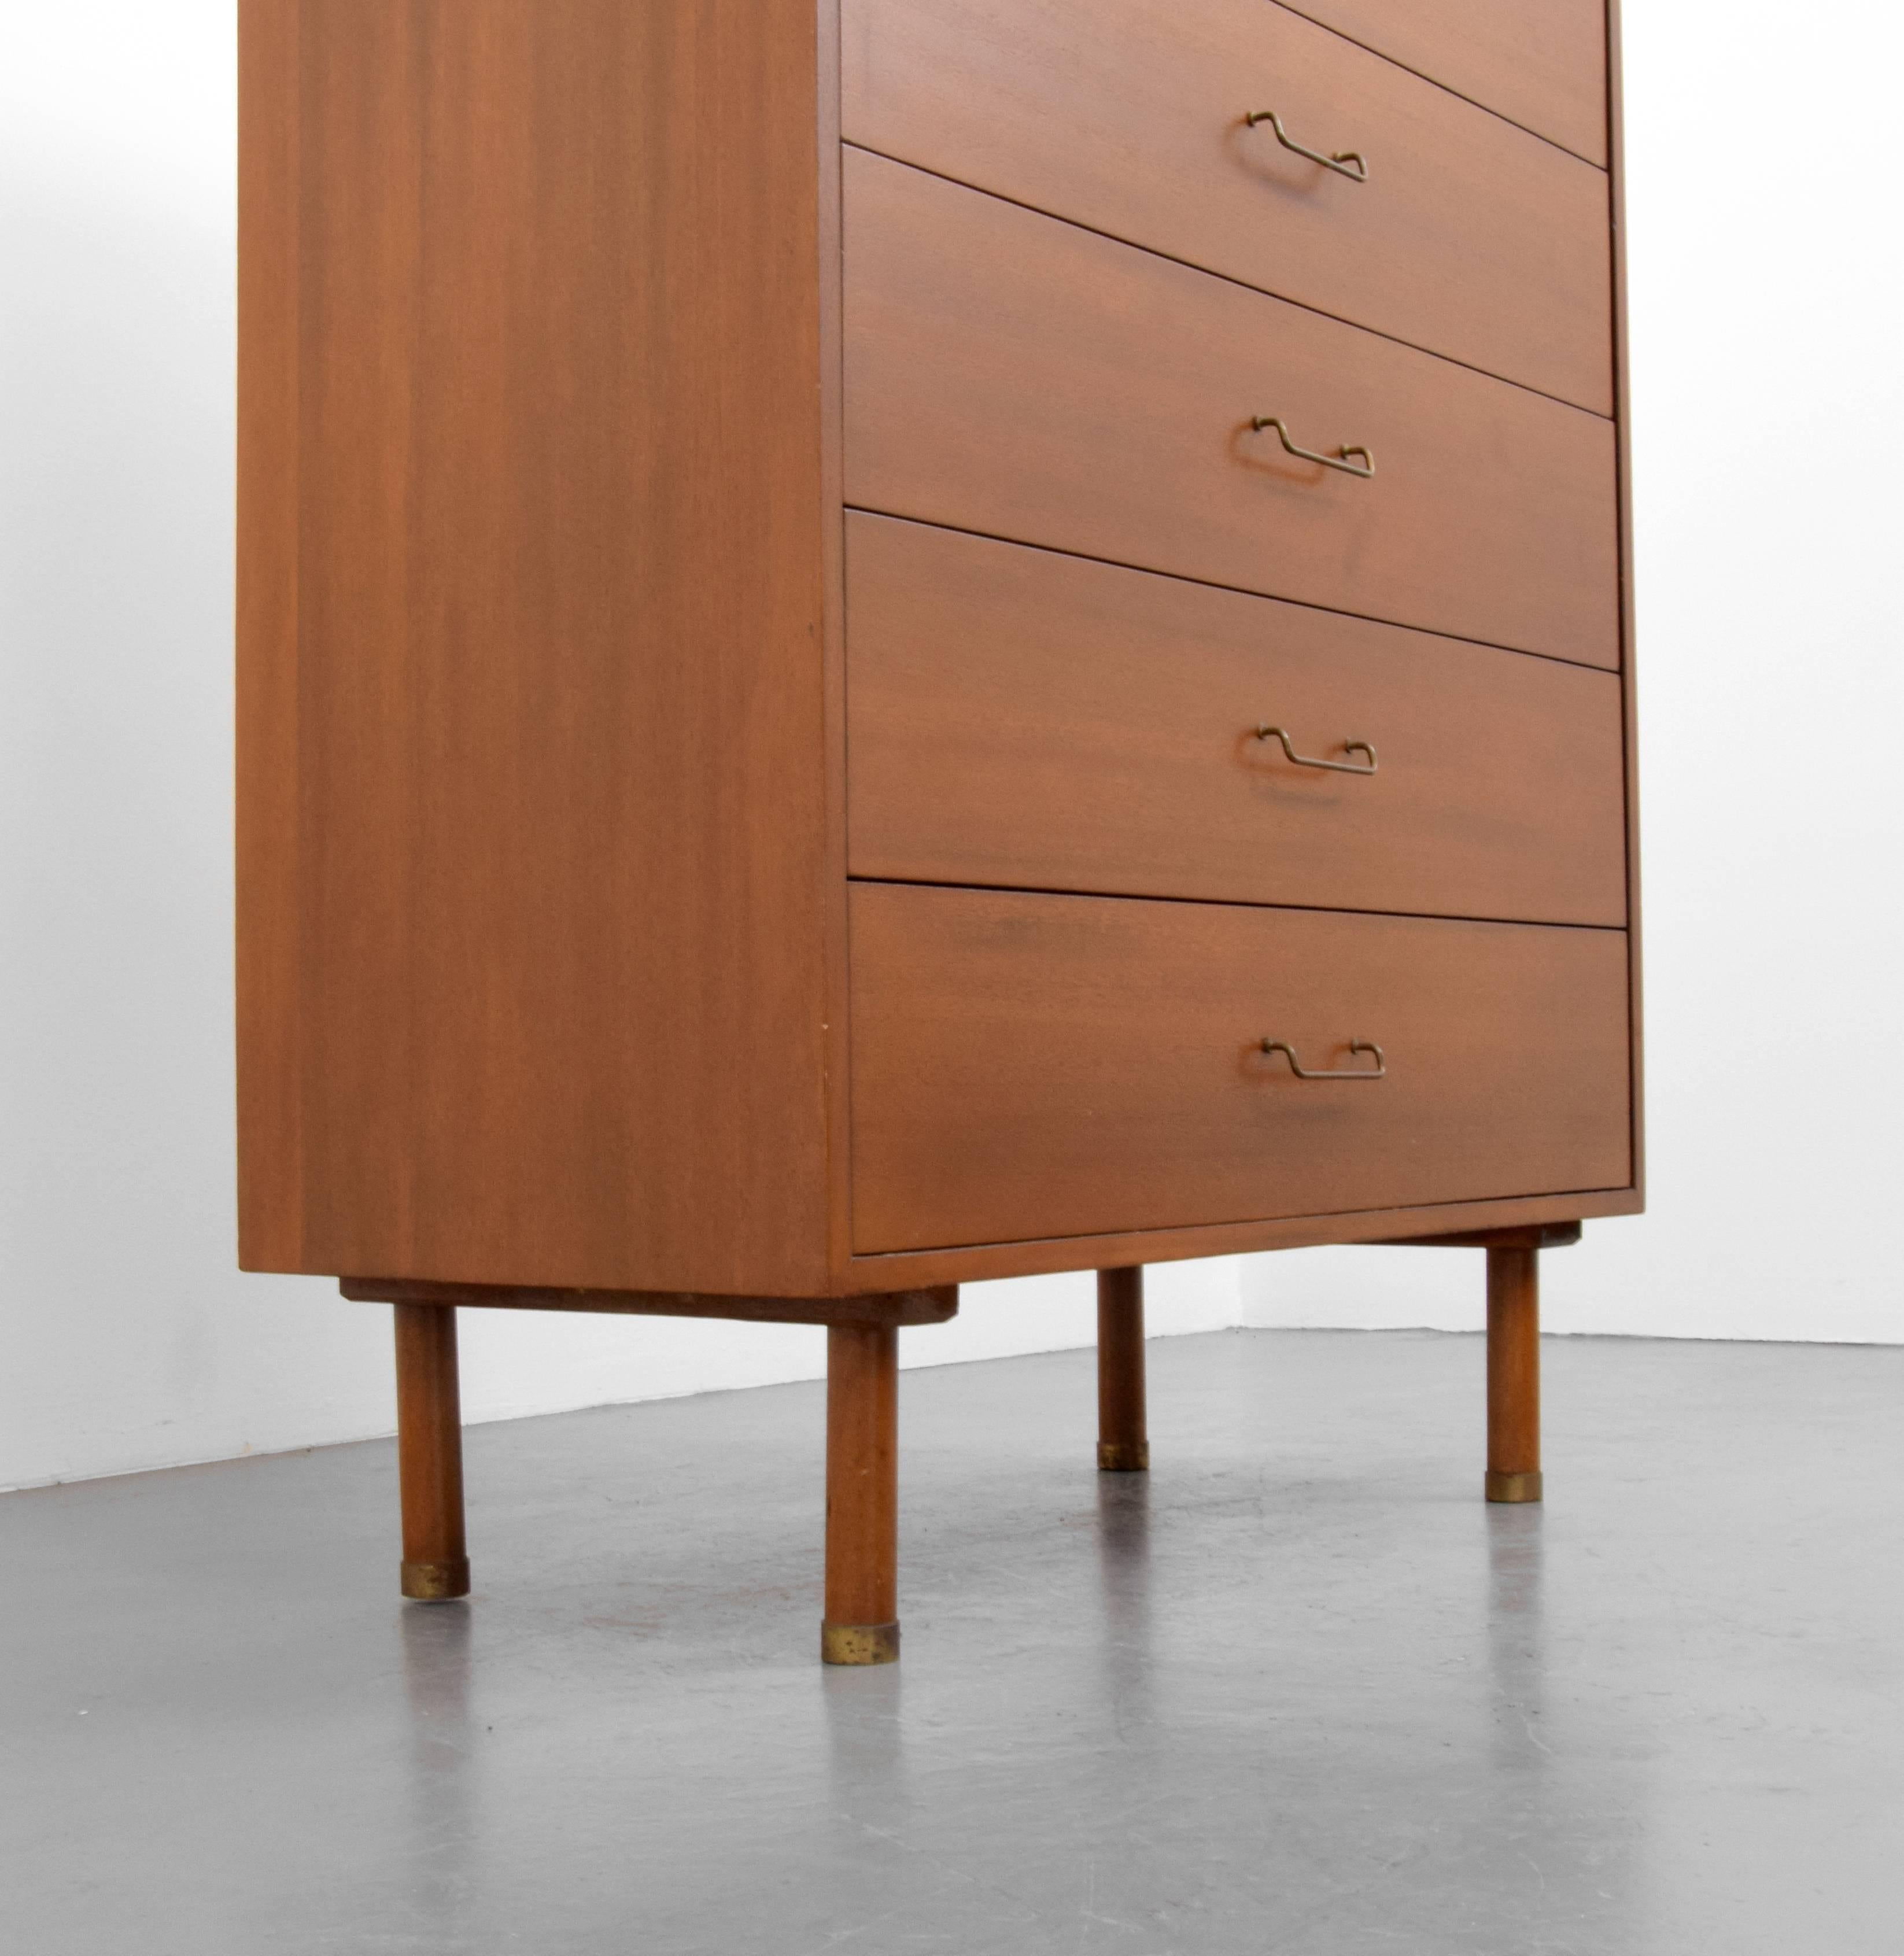 Chest/ dresser with six drawers by Harvey Probber.

Harvey Probber preferred simple lines in his designs. He would often use hardware and color in upholstery or wood to add contrast and emphasize the details.  He was known for his large sweeping